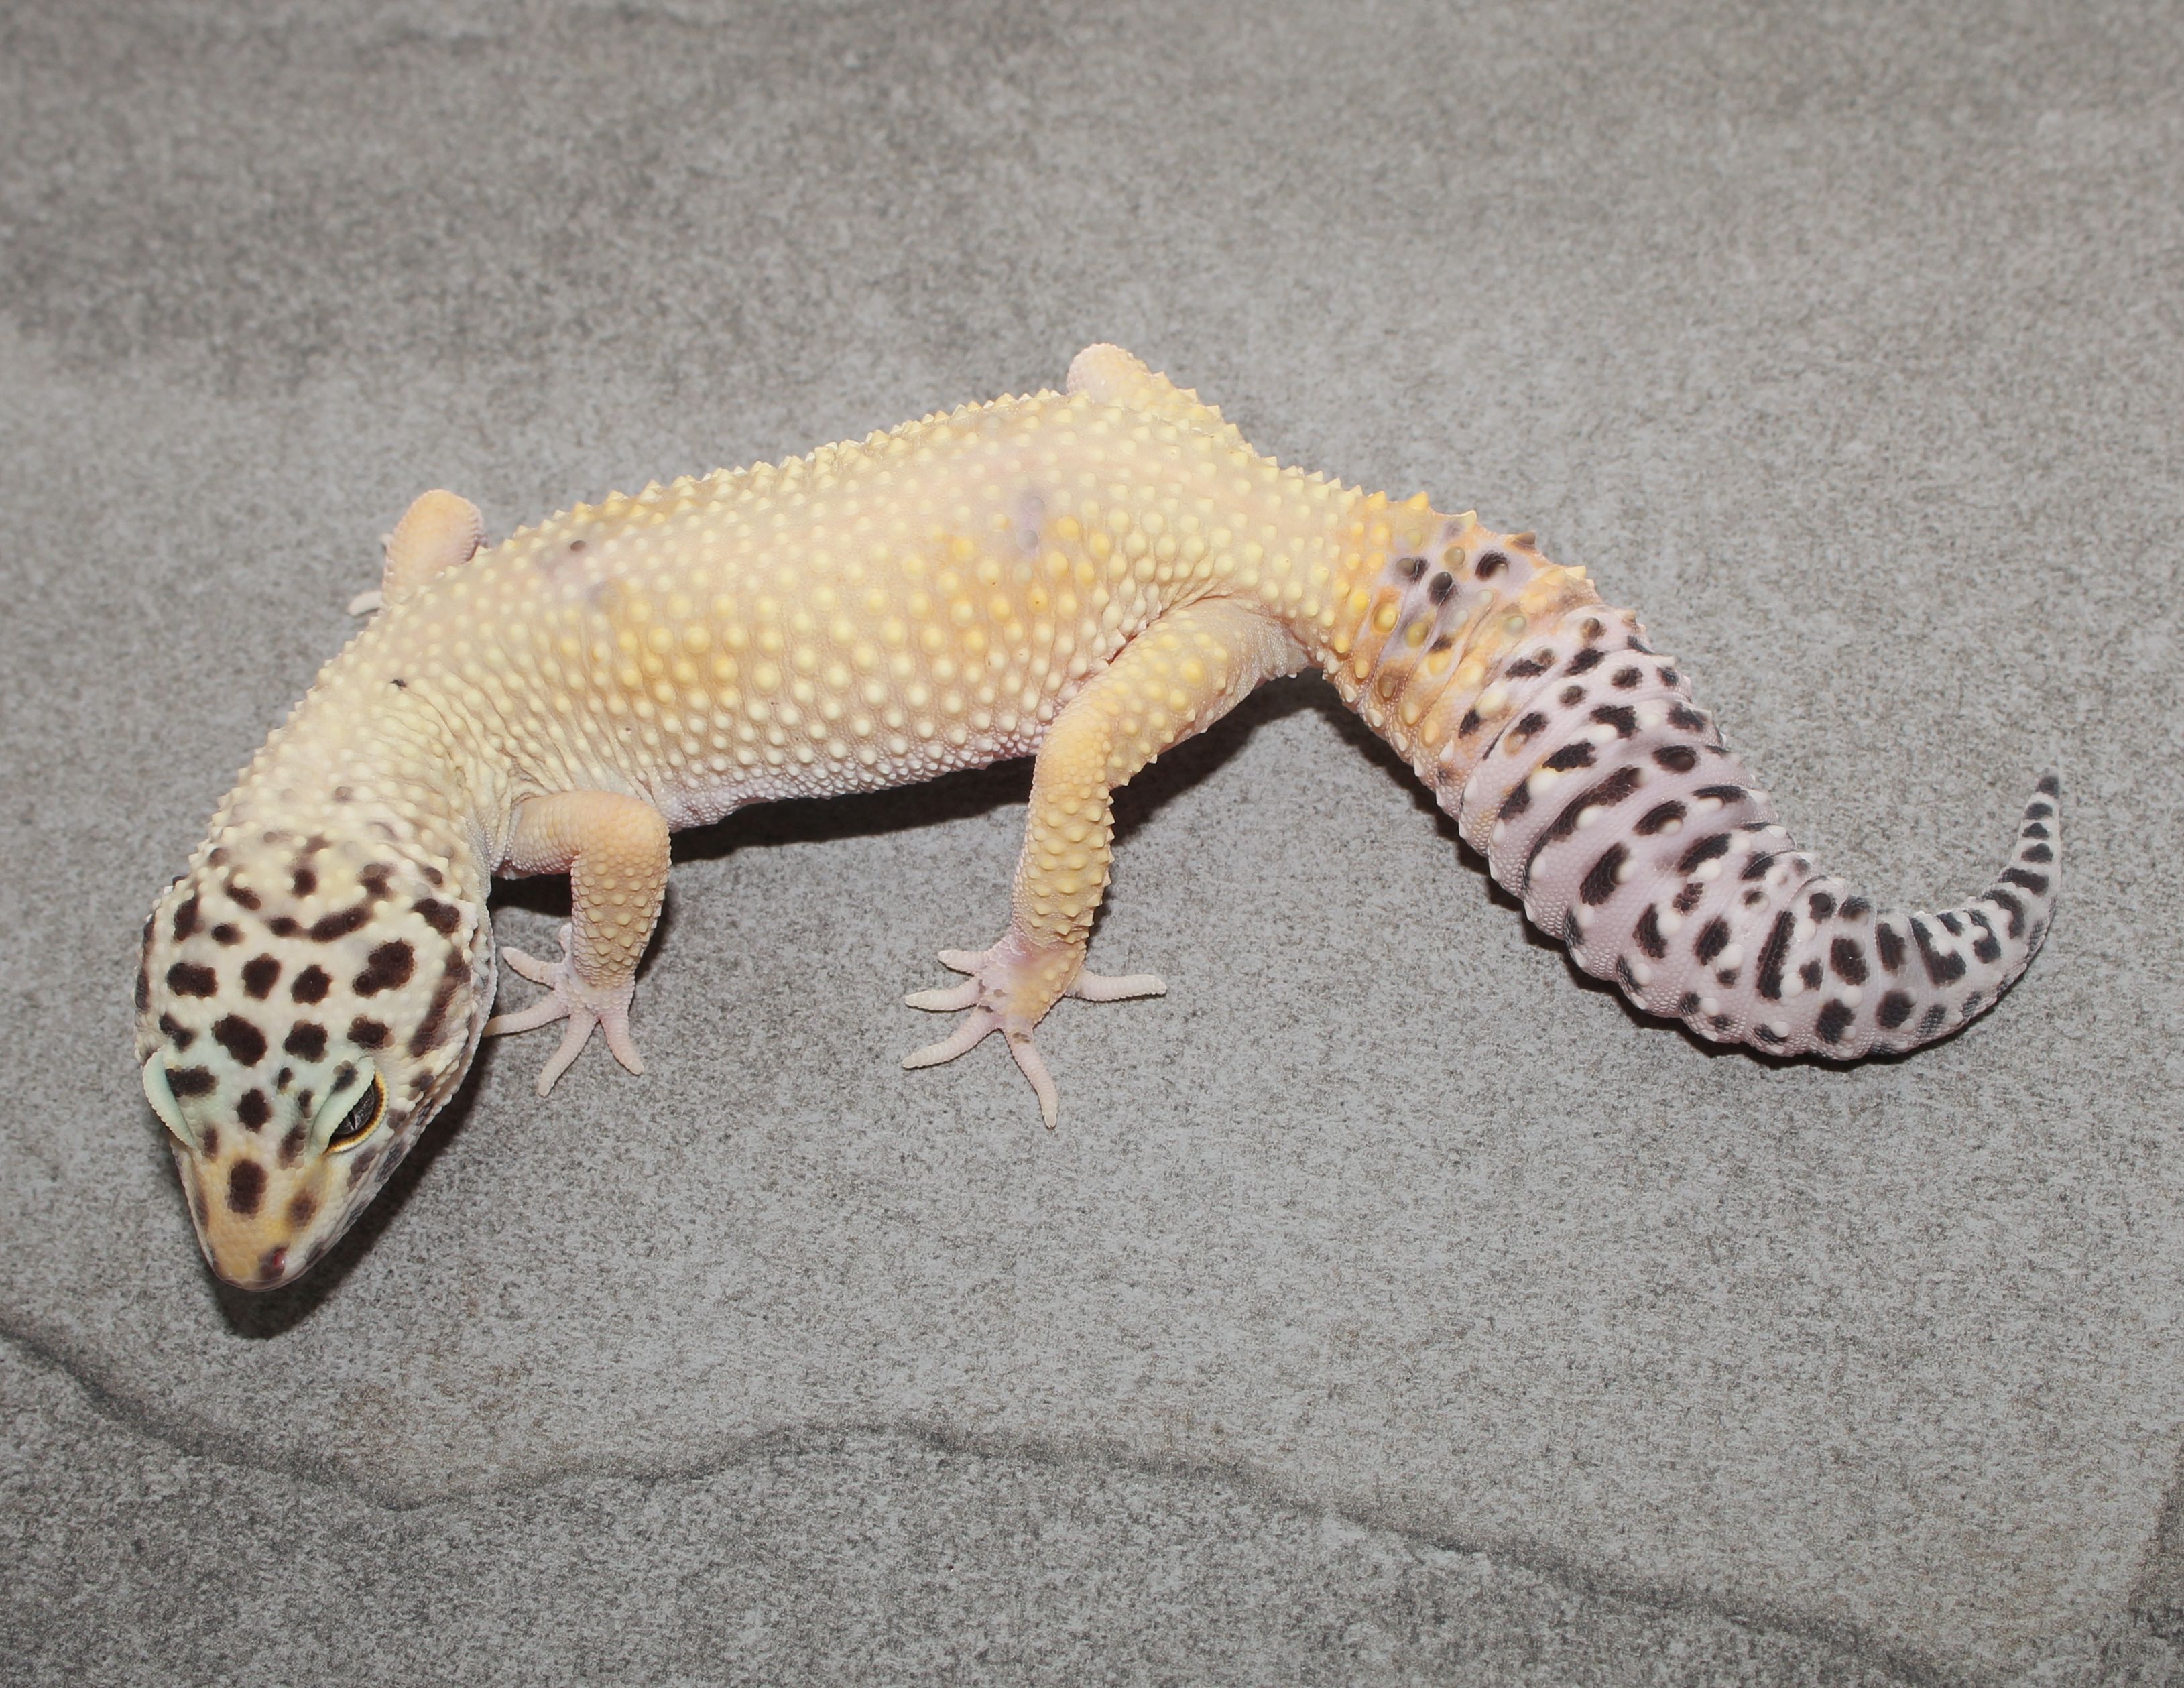 Ghost Leopard Gecko by Impeccable Gecko